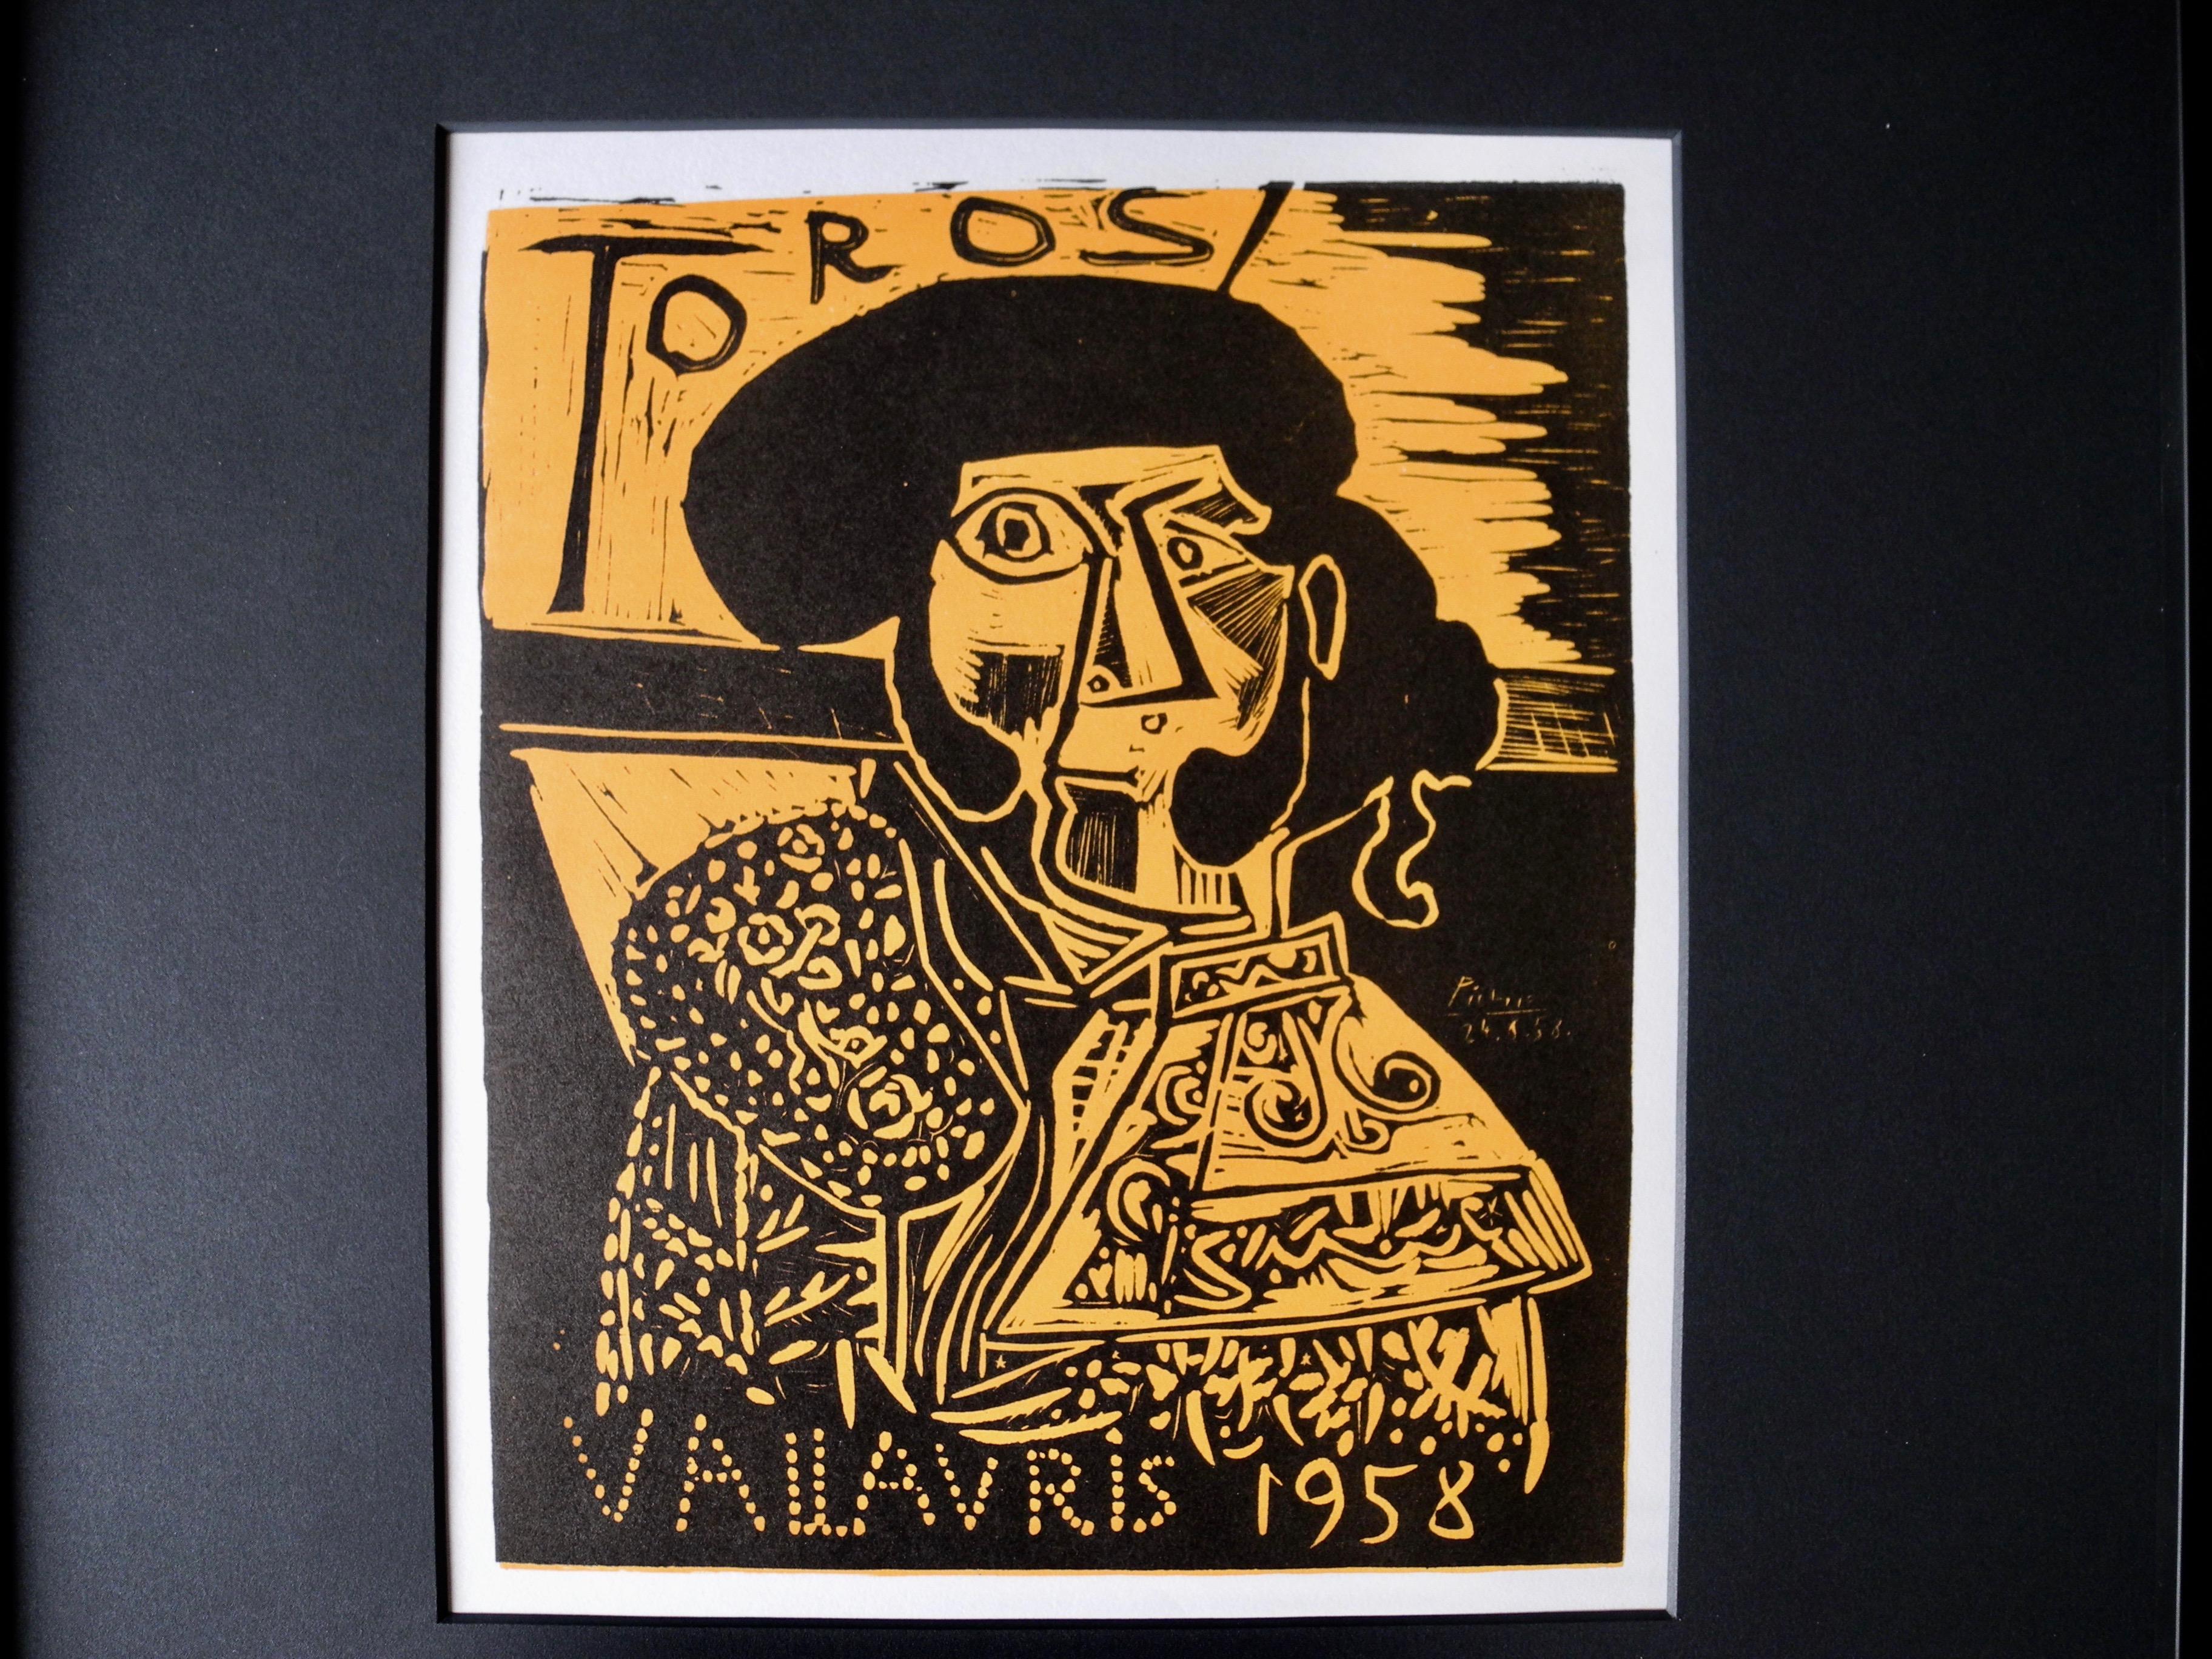 This vintage, framed and matted, small lithograph/poster is attributed to one of Picasso's woodcuts for Vallauris. A small town in the south of France where Picasso worked as a ceramicist. Signed and dated in the print.